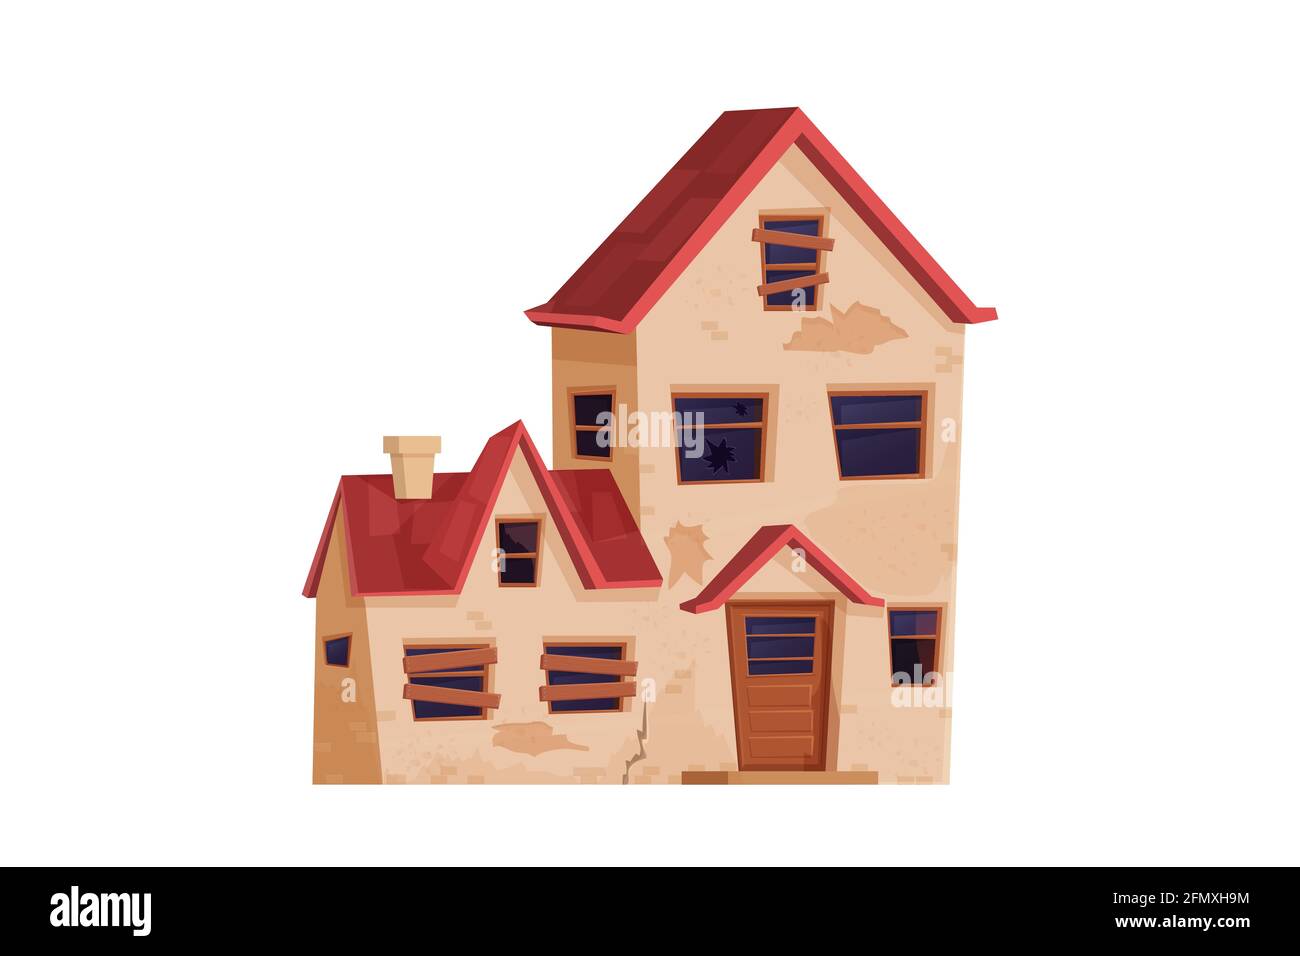 Poor house Cut Out Stock Images & Pictures - Alamy